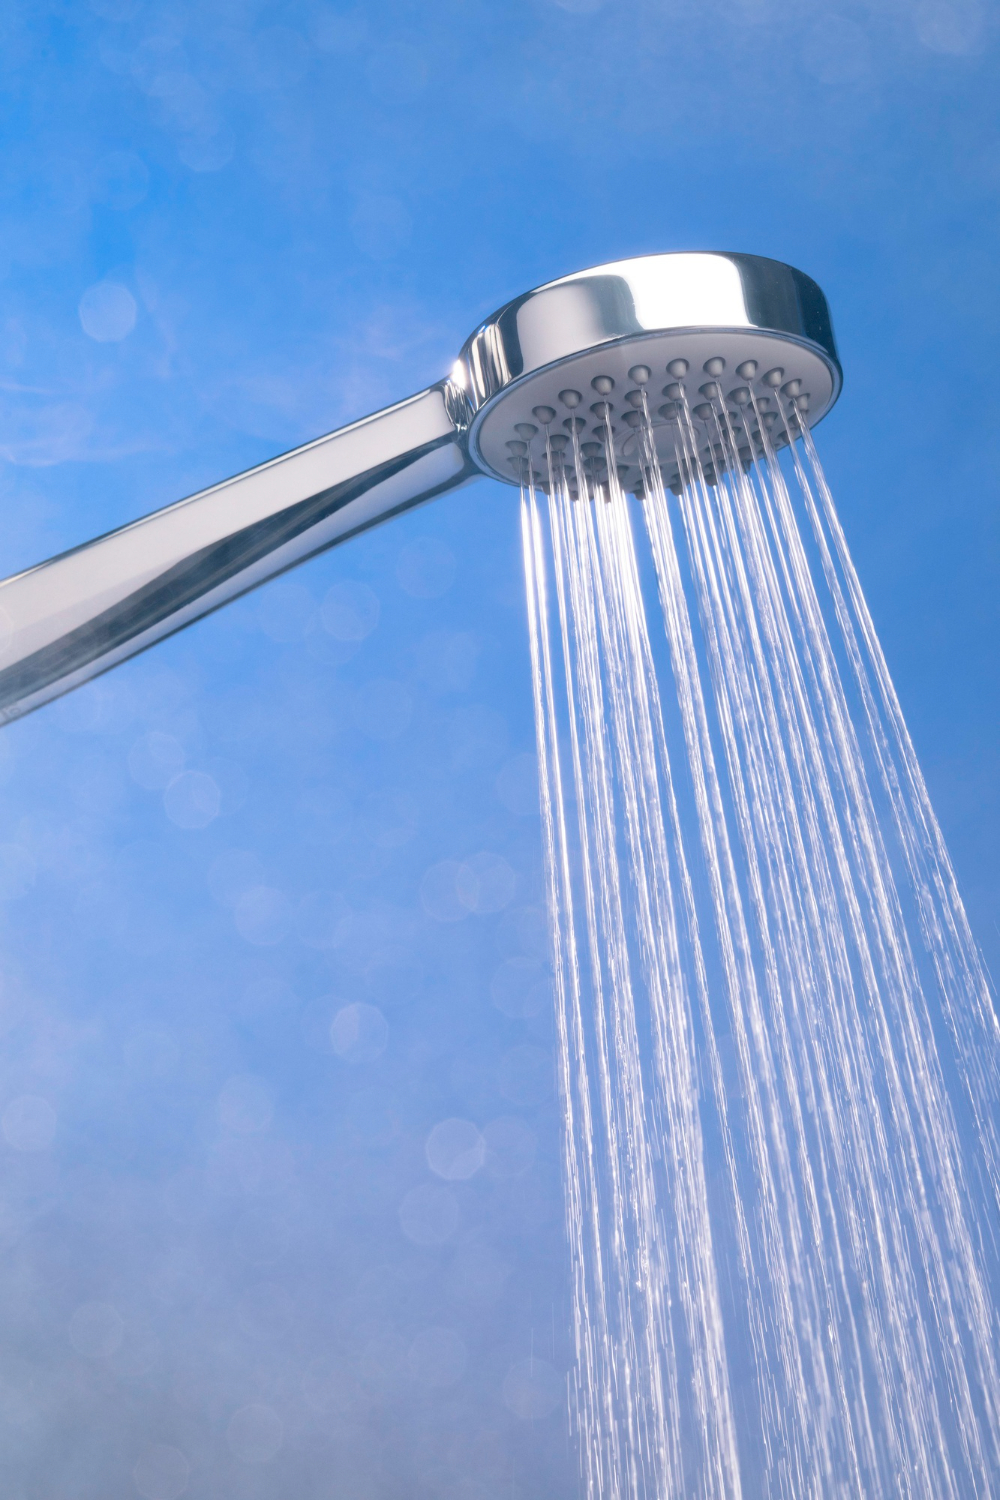 These showerheads are engineered to deliver a powerful spray that will wash away your worries and leave you feeling refreshed.